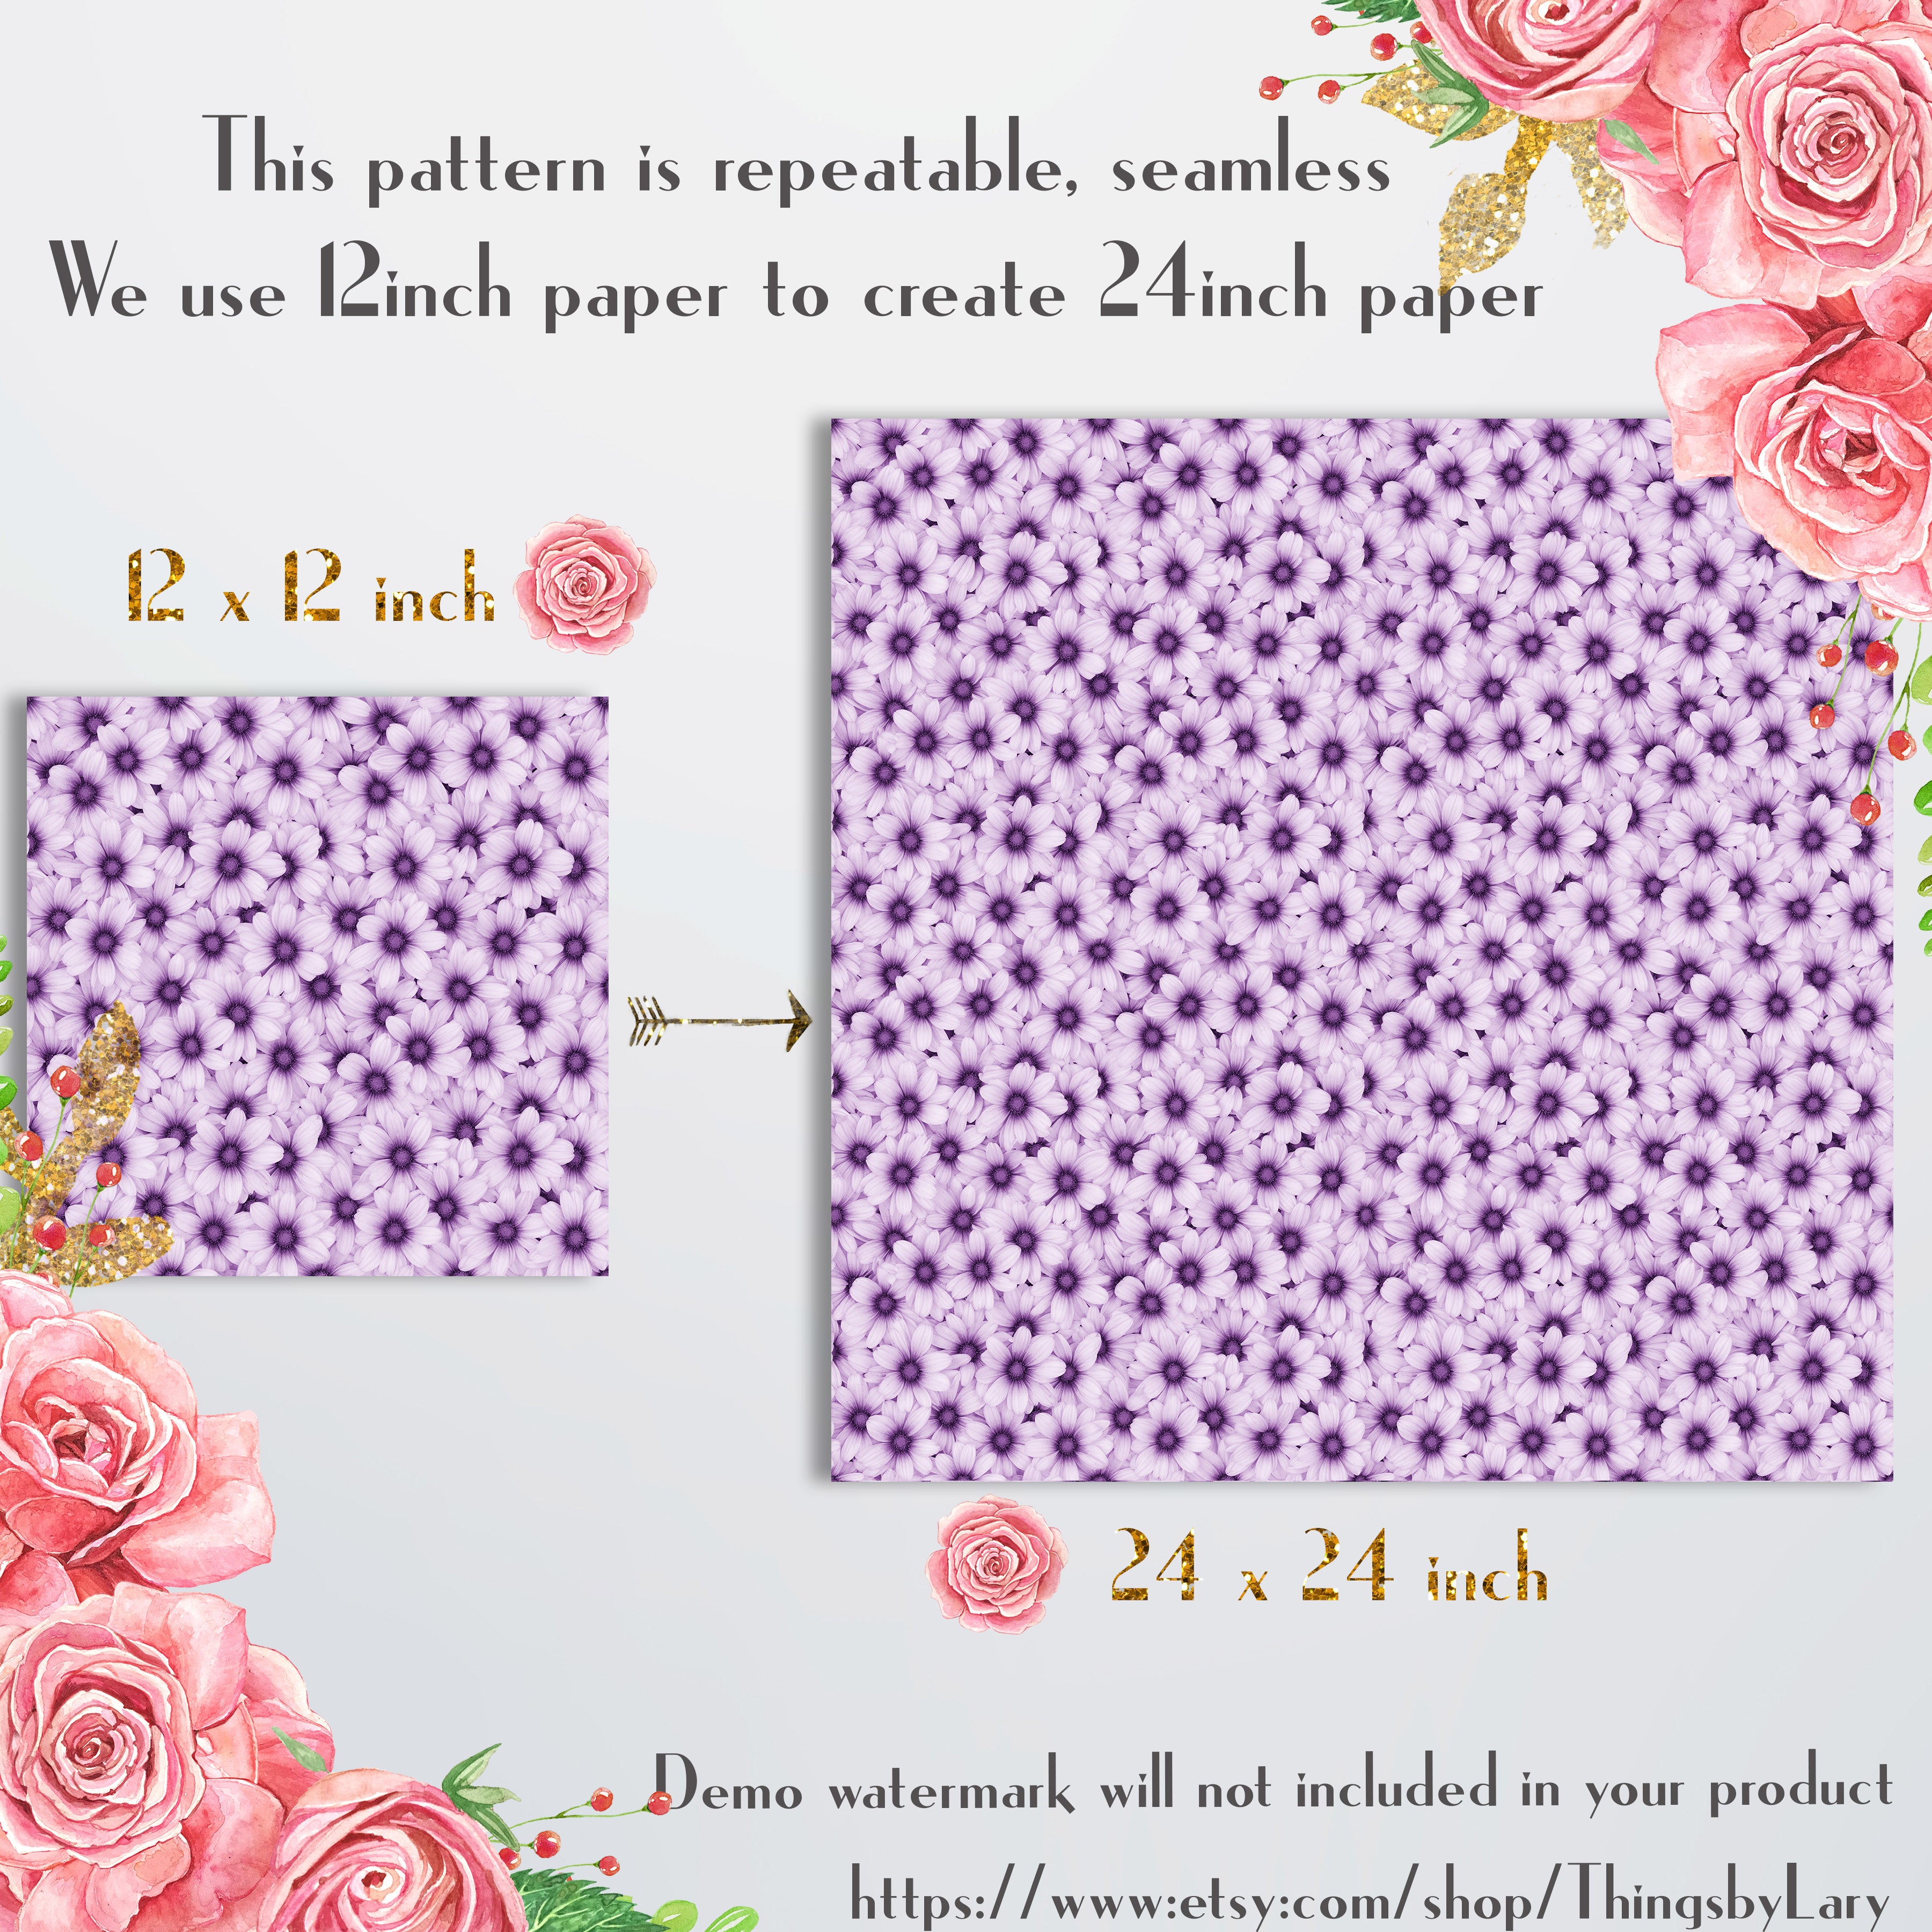 100 Seamless Daisy Flowers Digital Papers